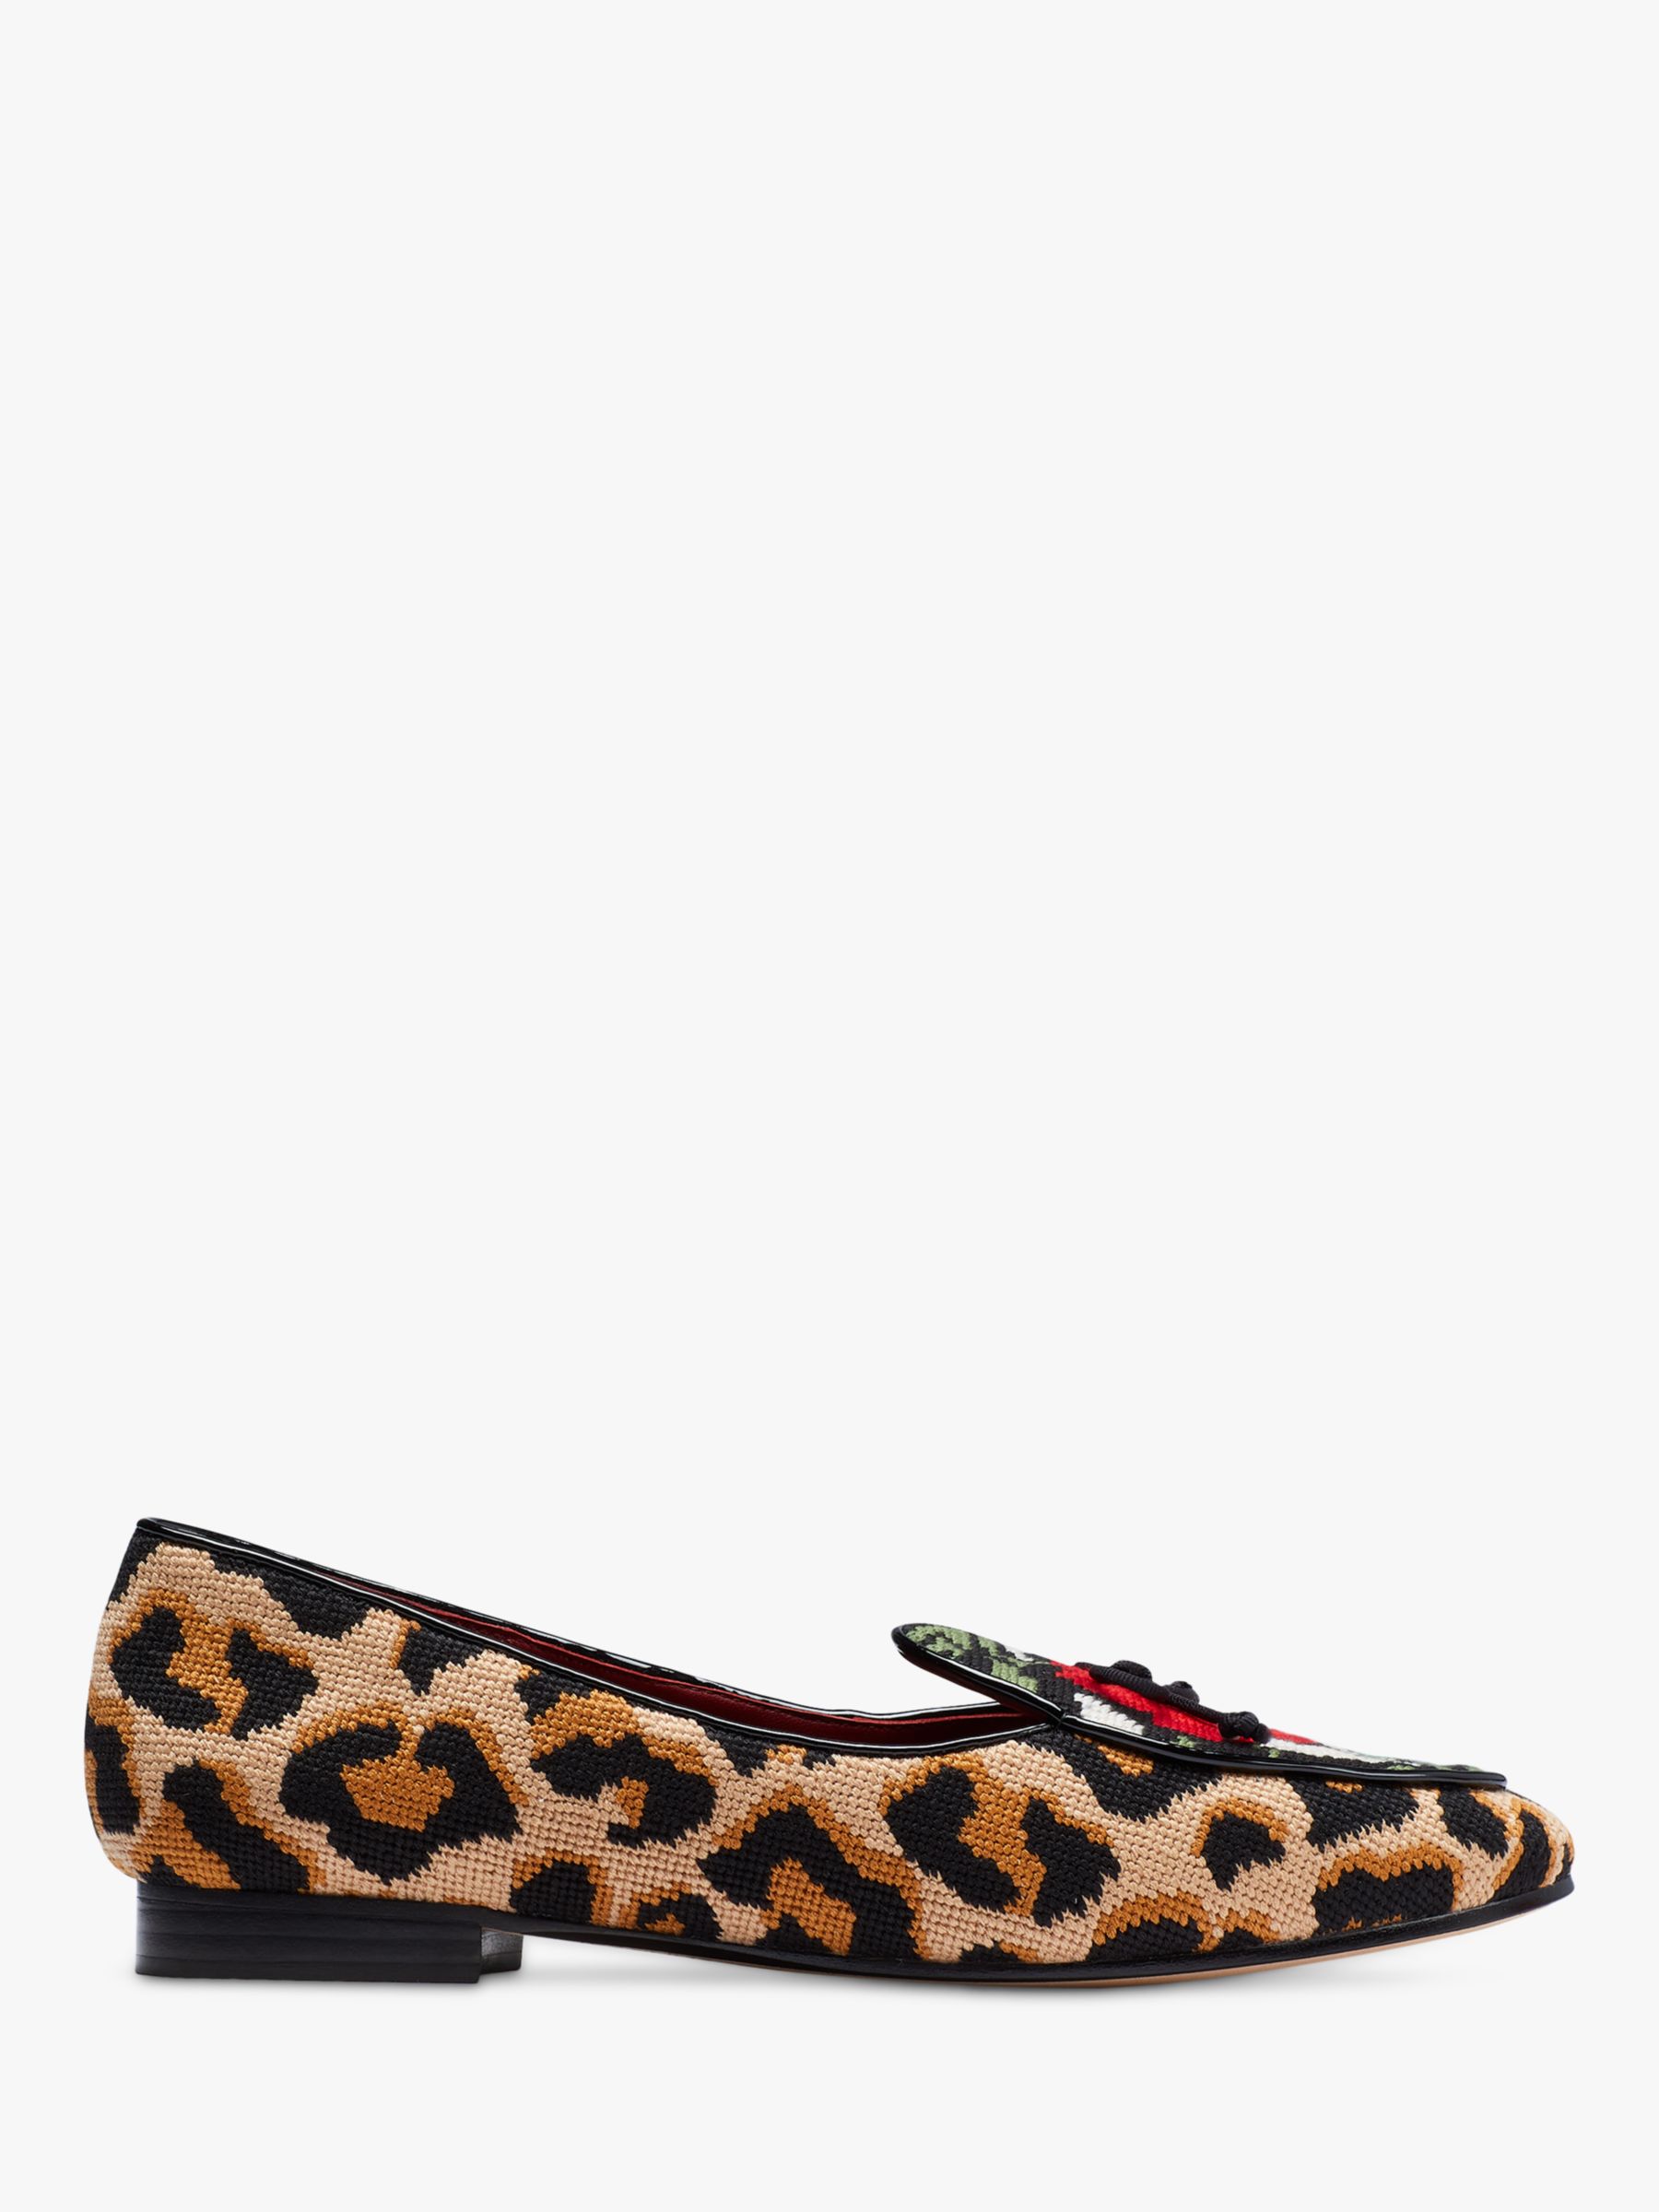 kate spade new york Leopard Print Loafers, Brown